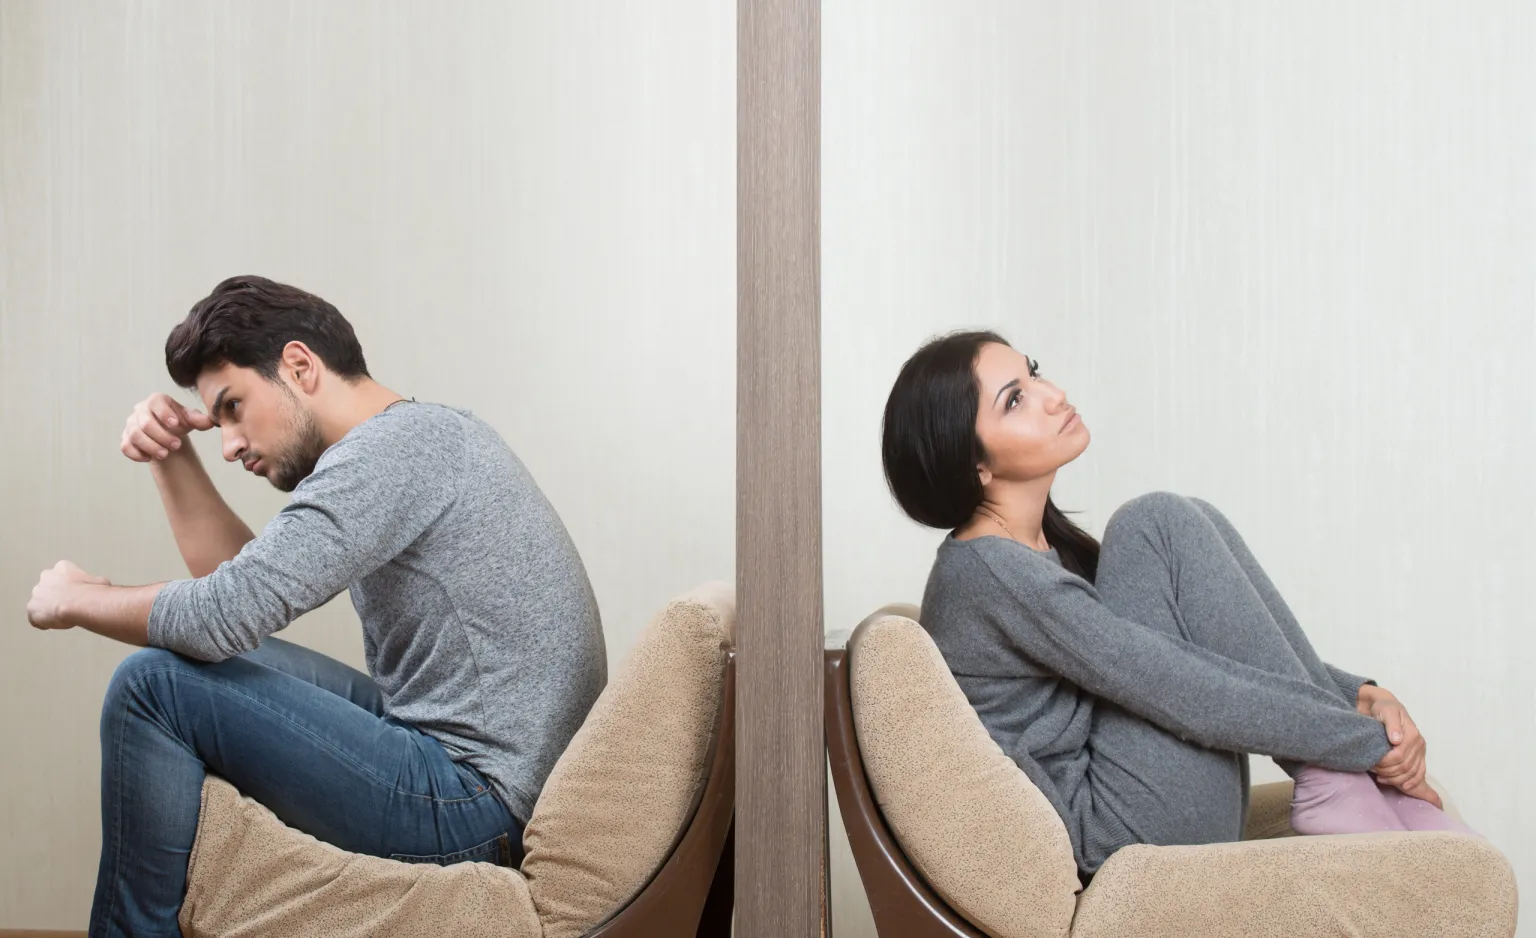 5 Signs Your Marriage Is In Trouble